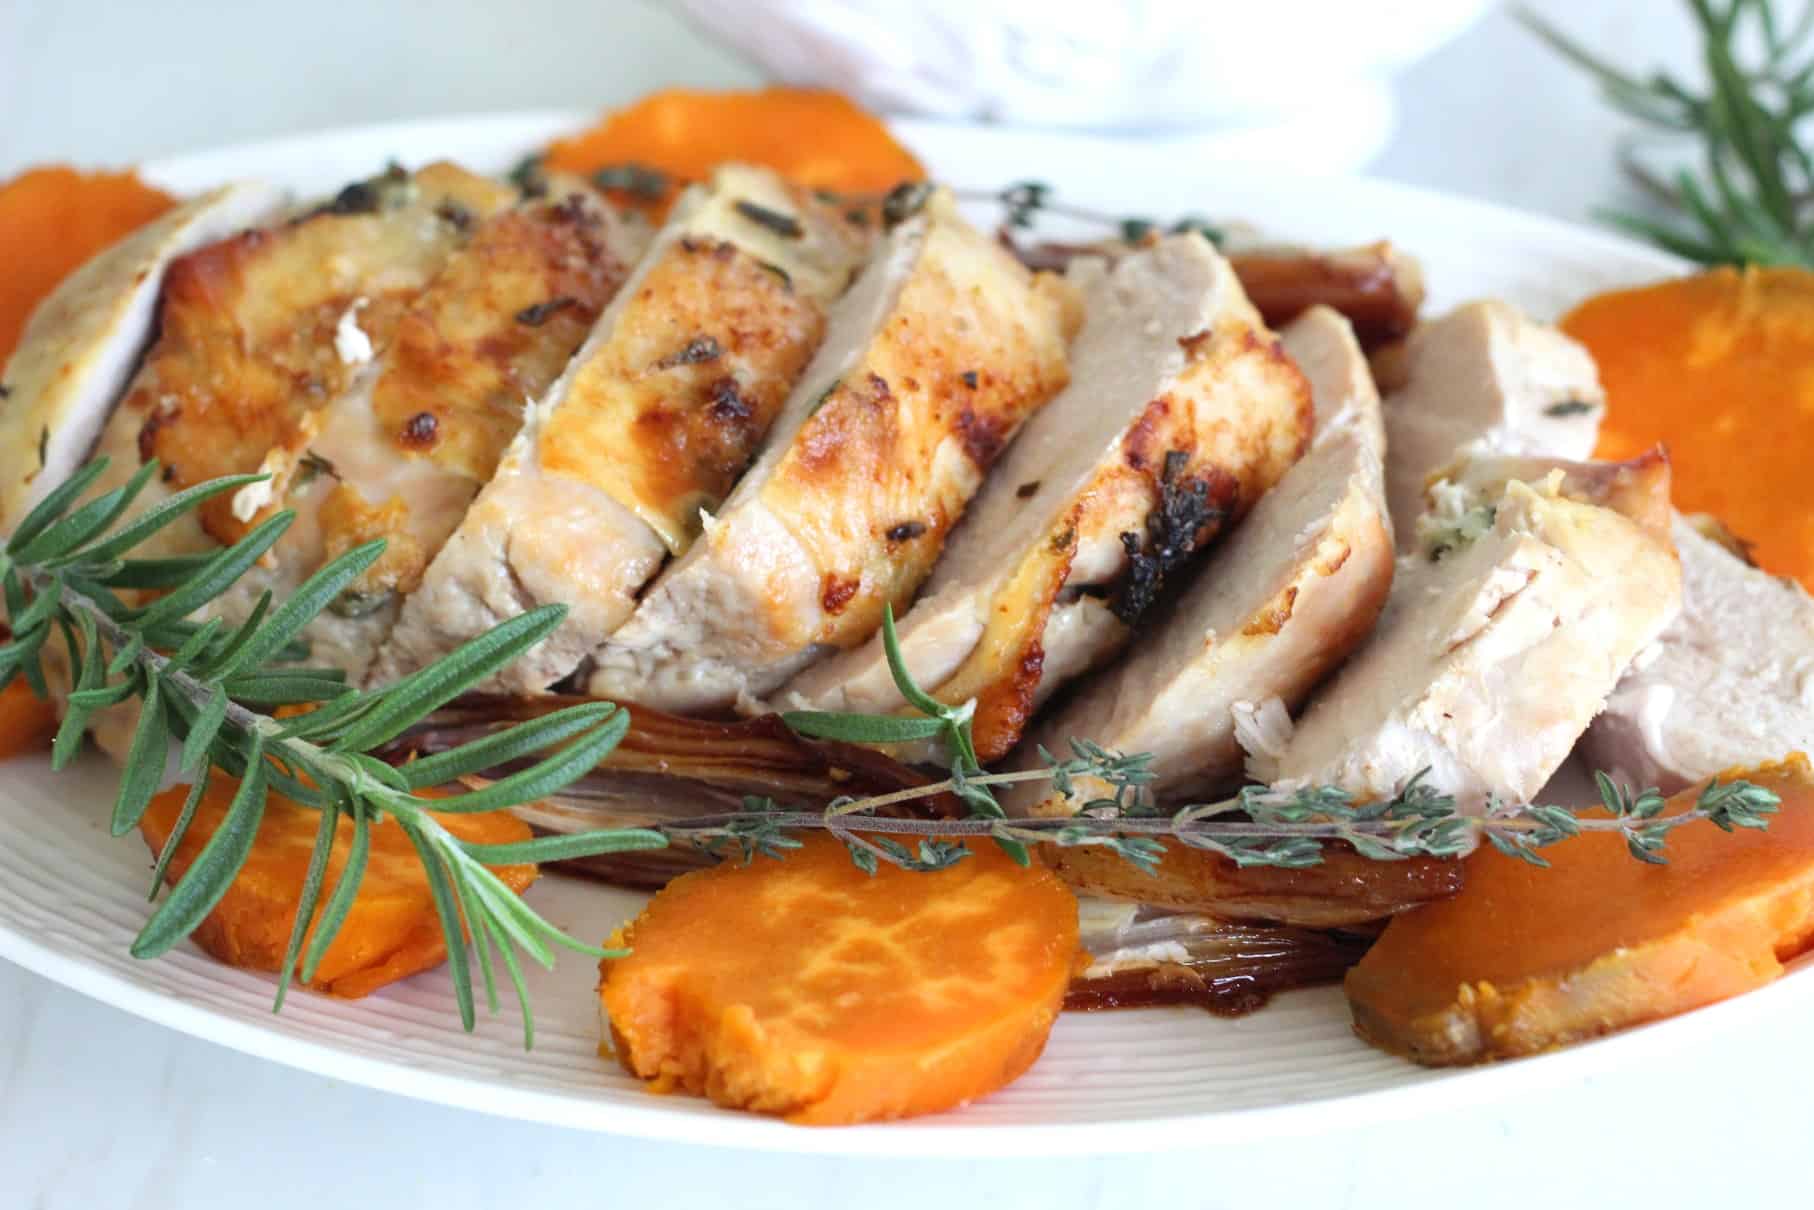 Roasted turkey breast on a platter, accompanied with herbs, sweet potato slices.